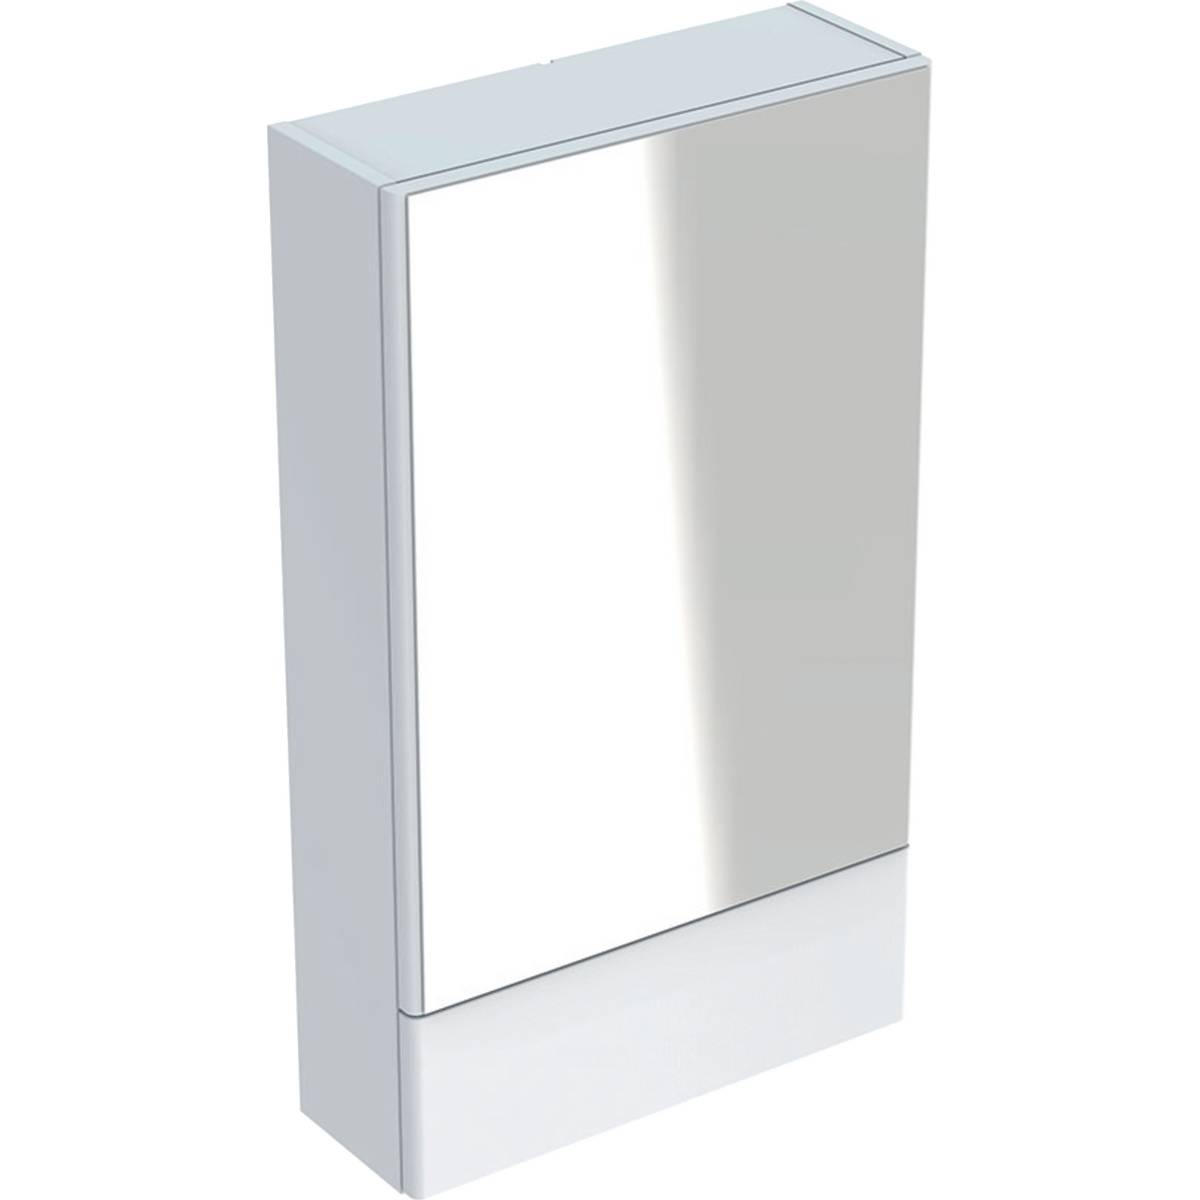 Selnova Square mirror cabinet with one door and one pull-down door